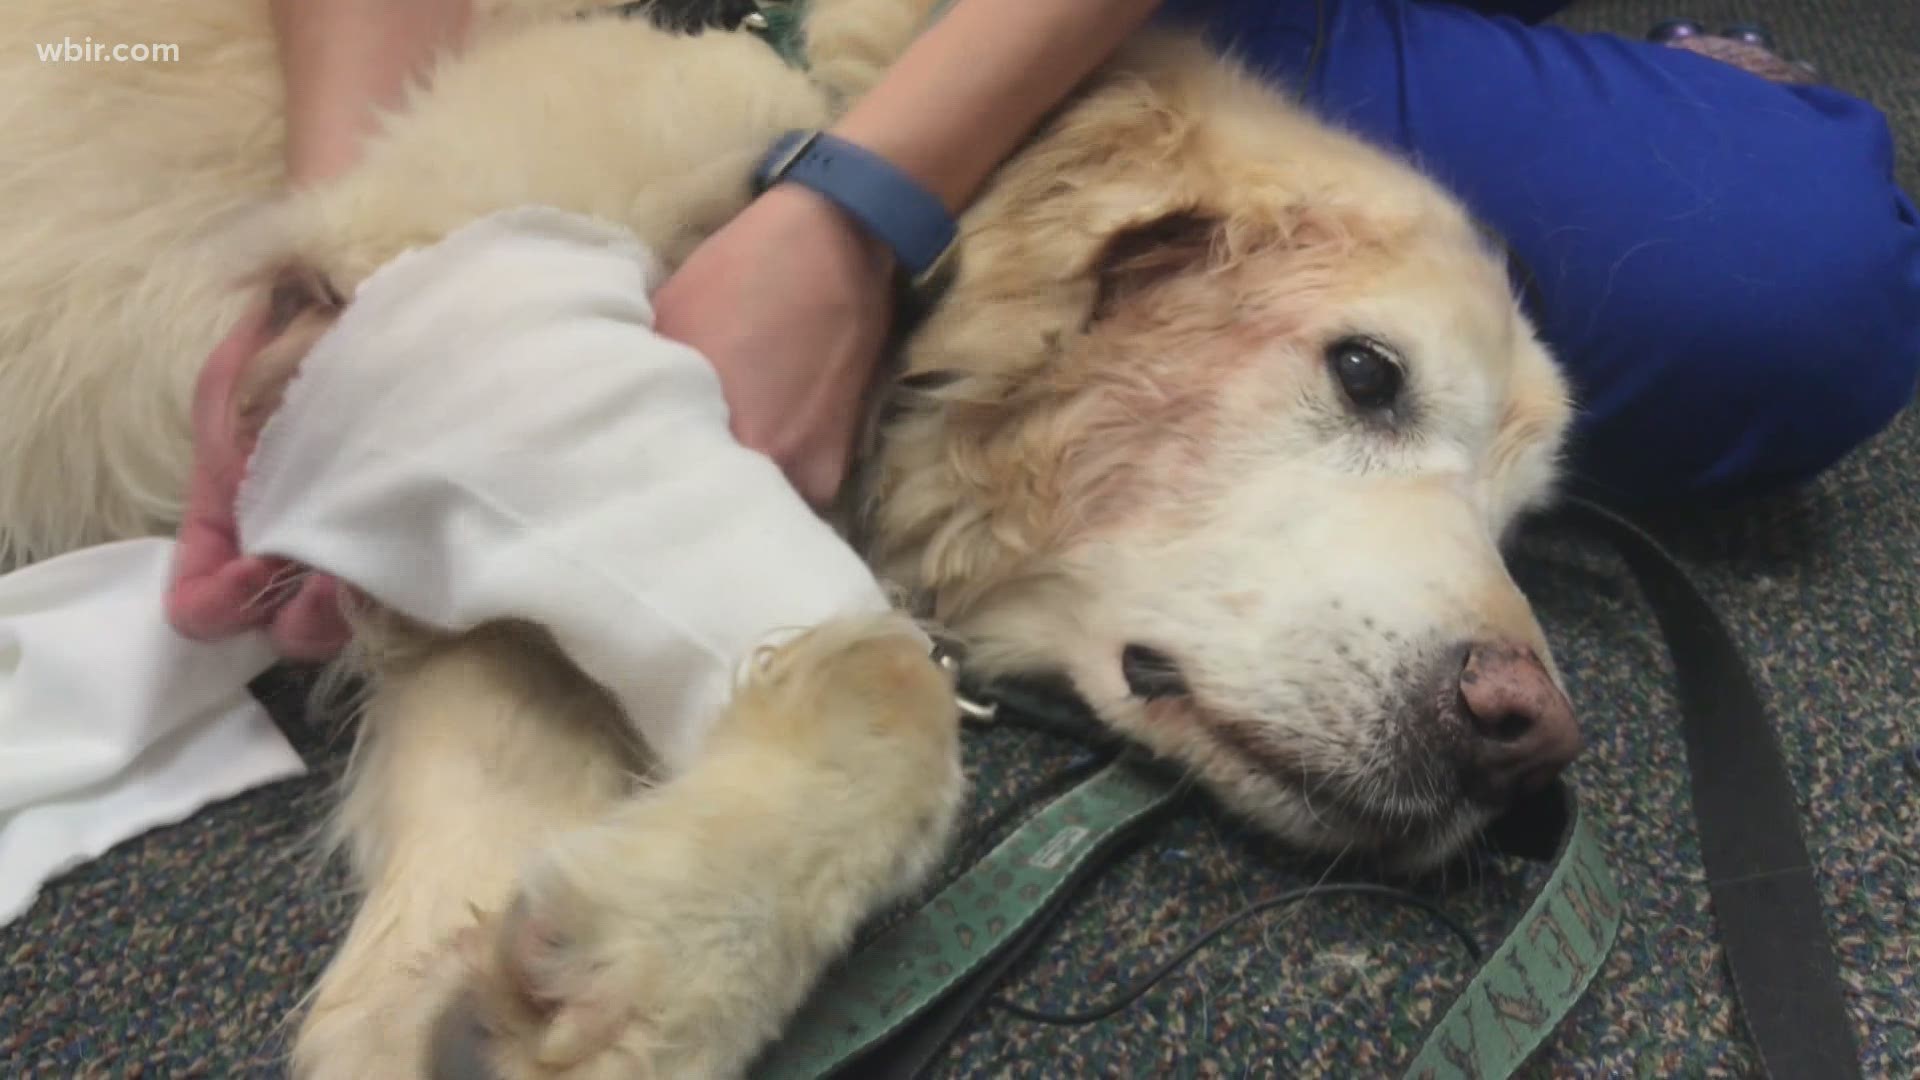 Jessica Montoya with the UT College of Veterinary Medicine said many dogs, particularly larger dogs, develop these elbow sores, and it can be very uncomfortable.